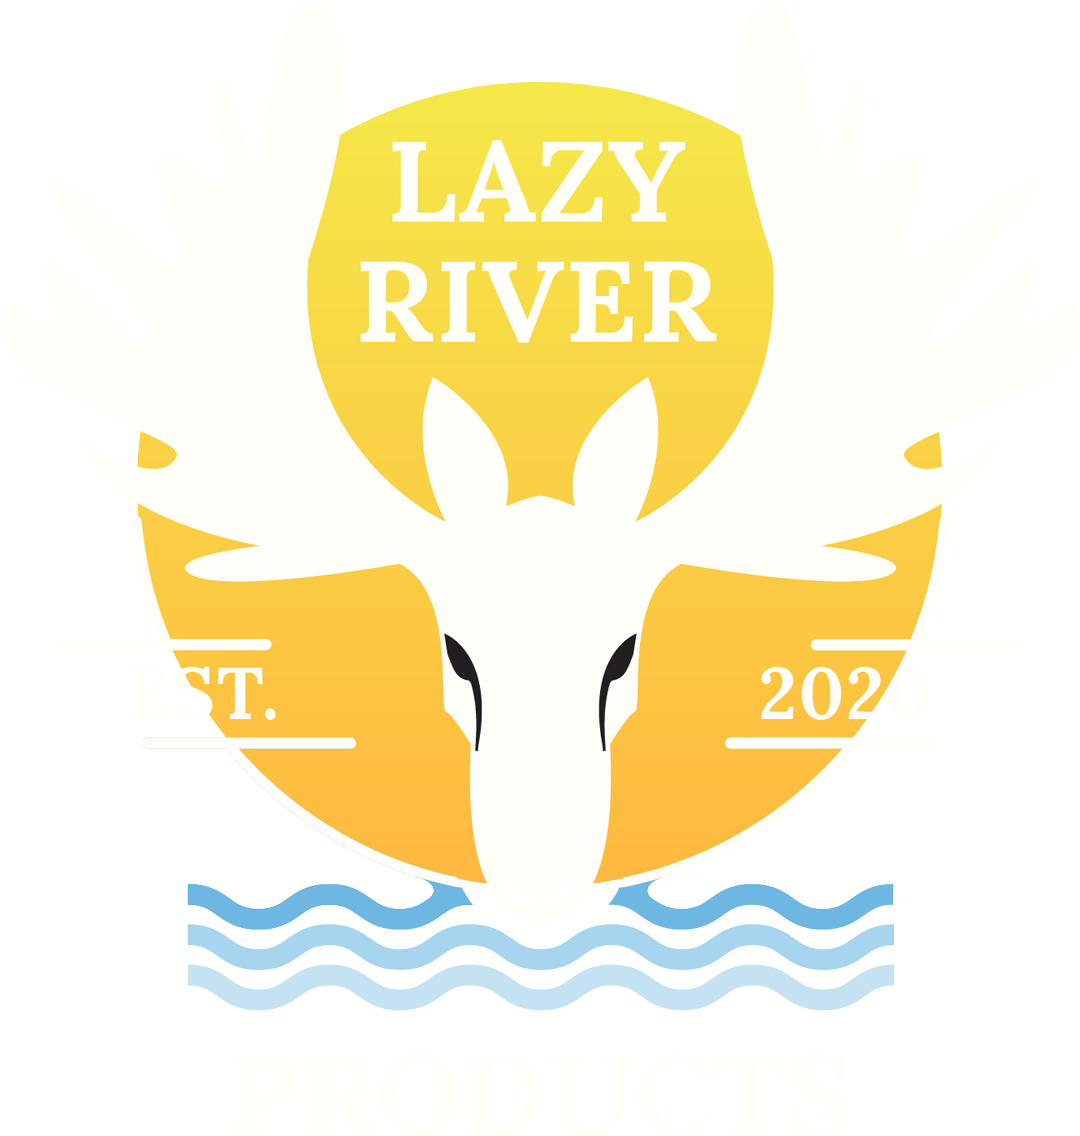 lazy river products mass recreational dispensary logo